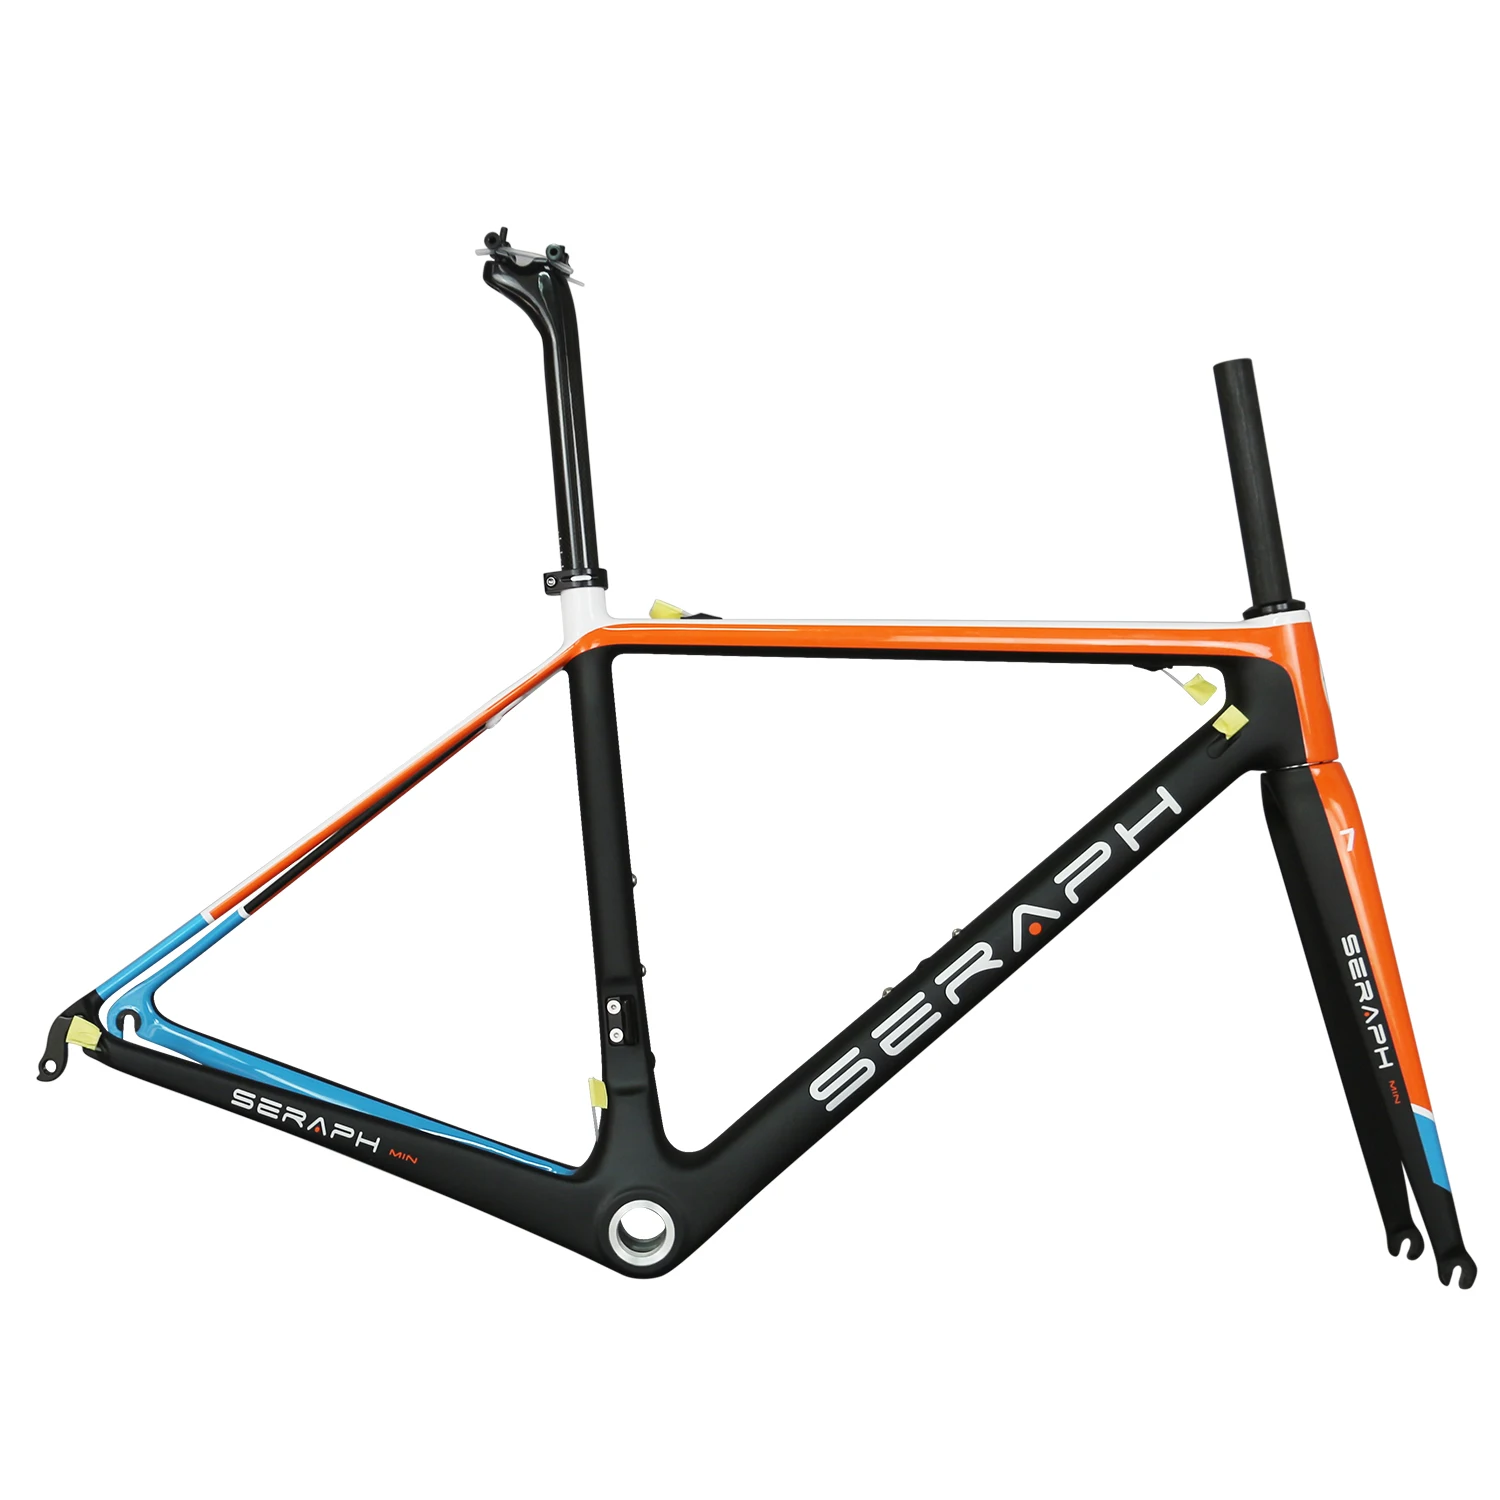 DI2 series road bike carbon frame frame, wholesale T1000 ultra- light frame.Accept cutom painted bicycle FM066